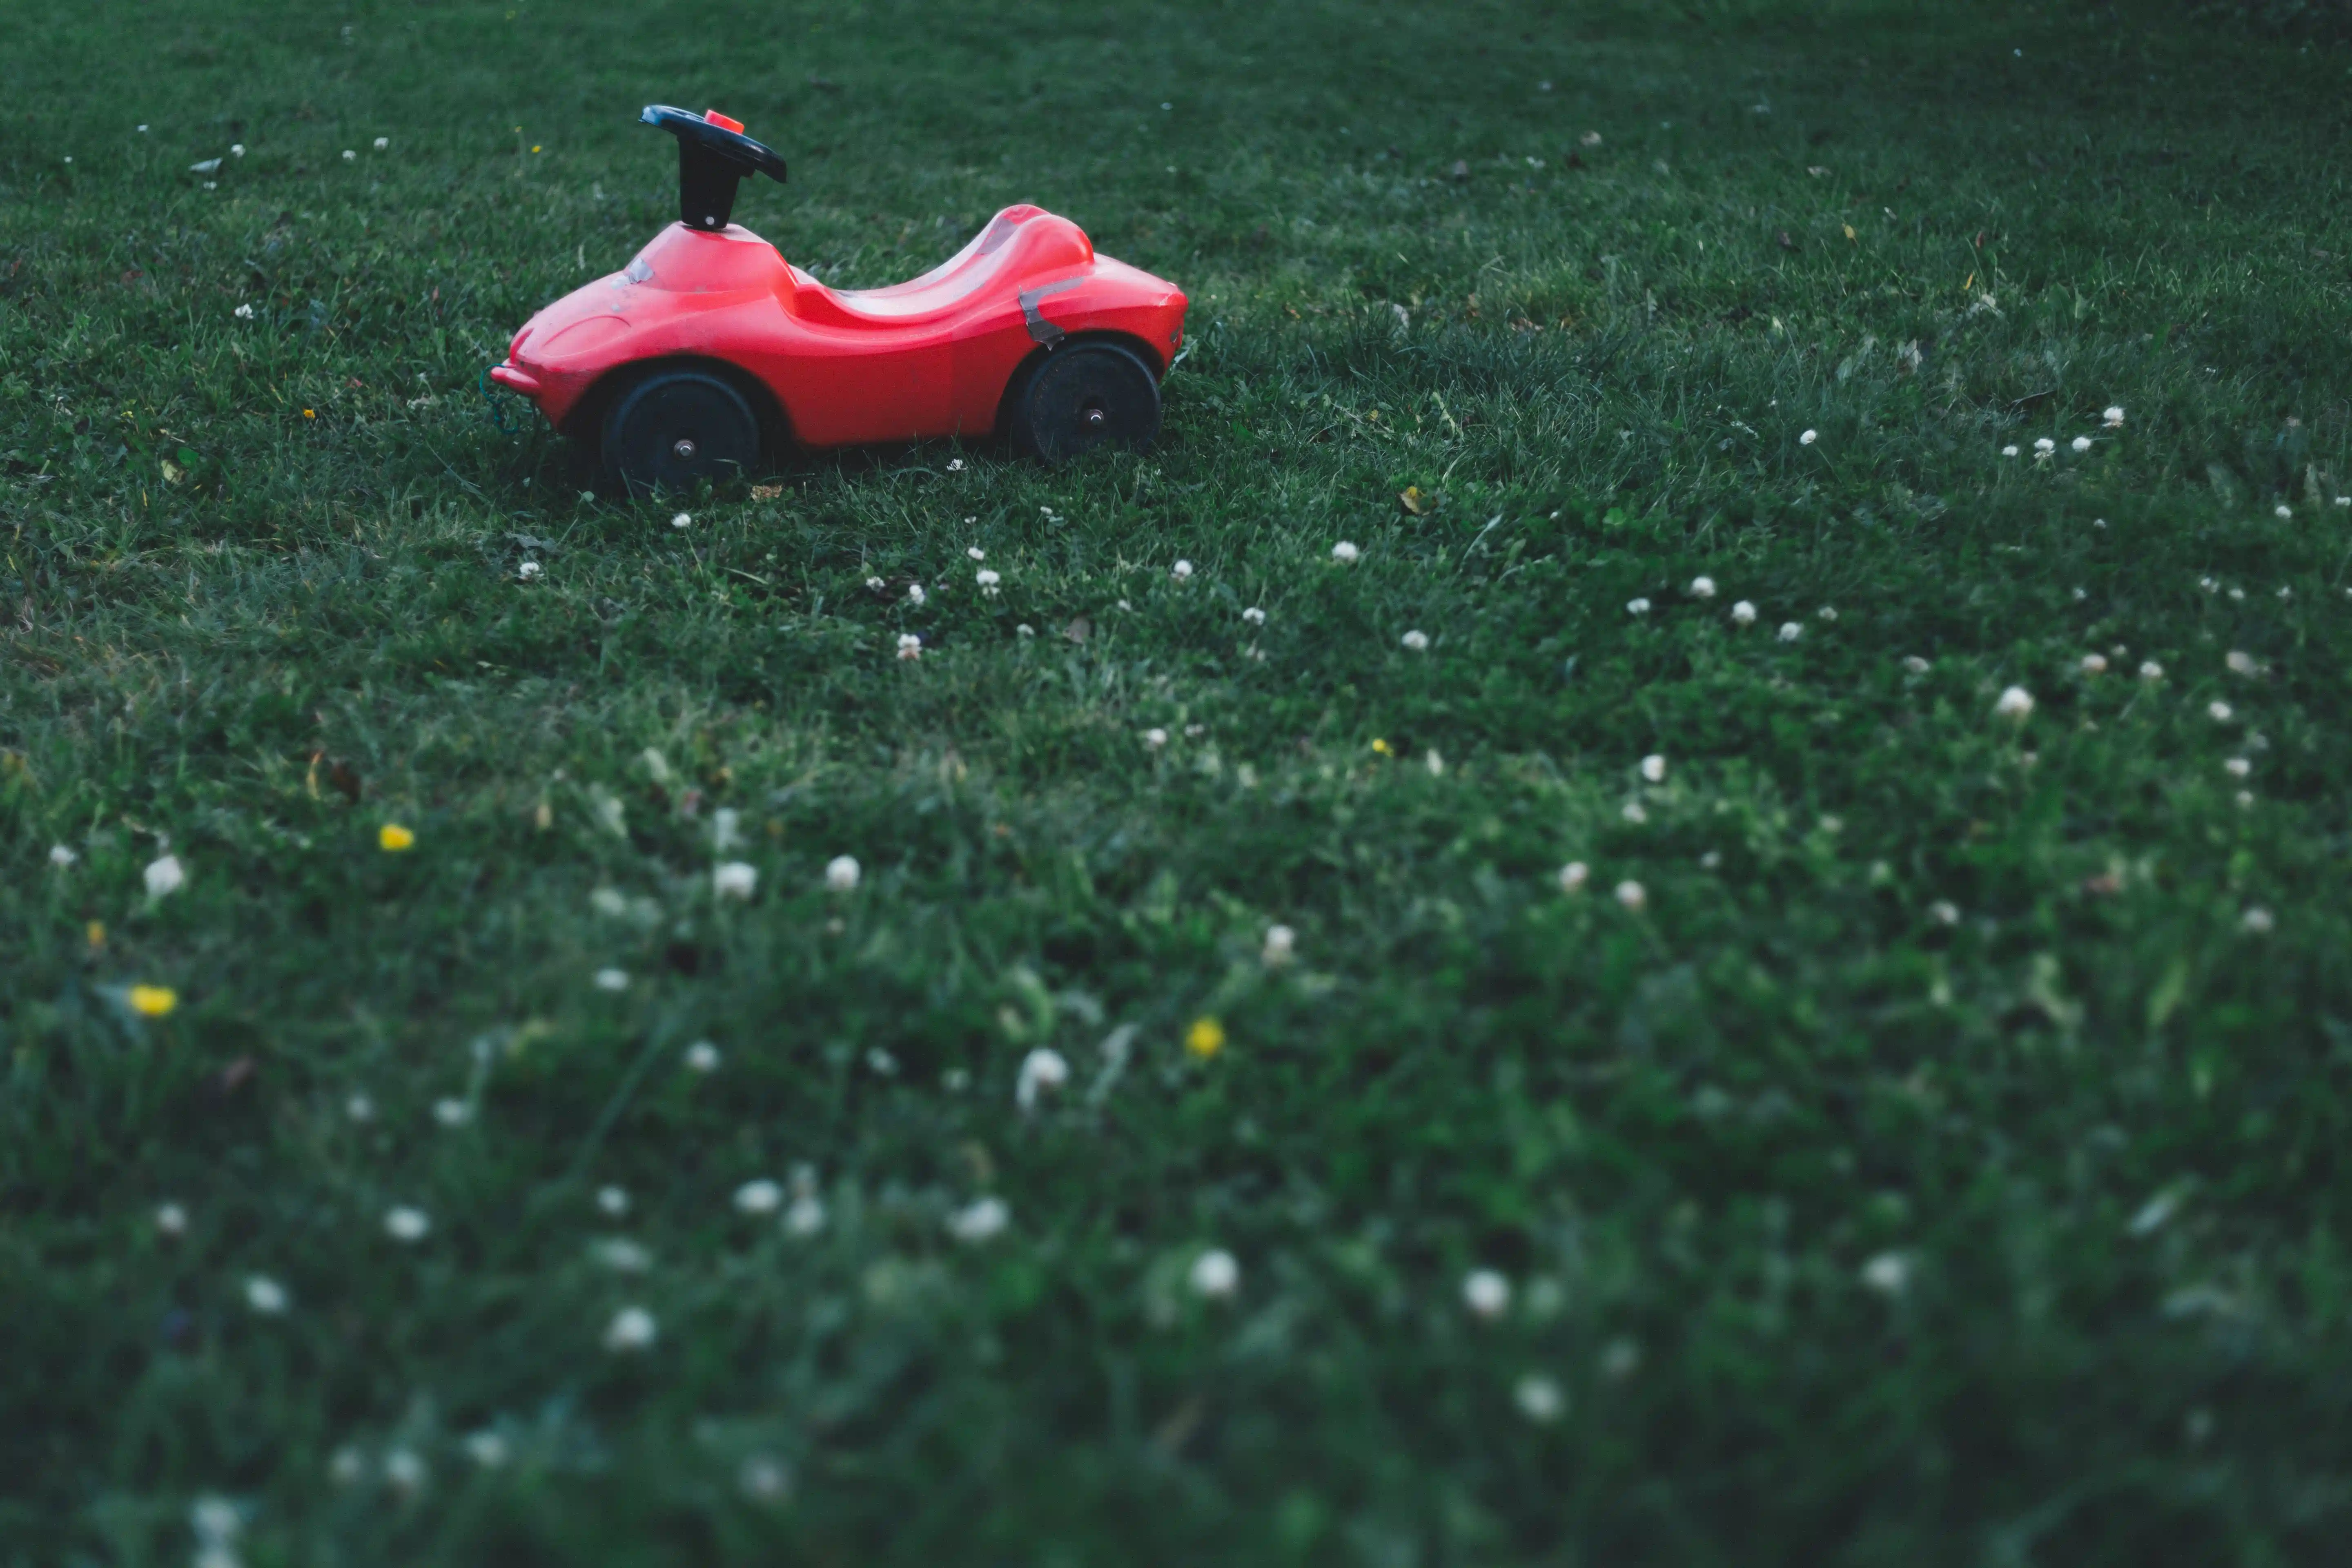 Red car toy in the grass